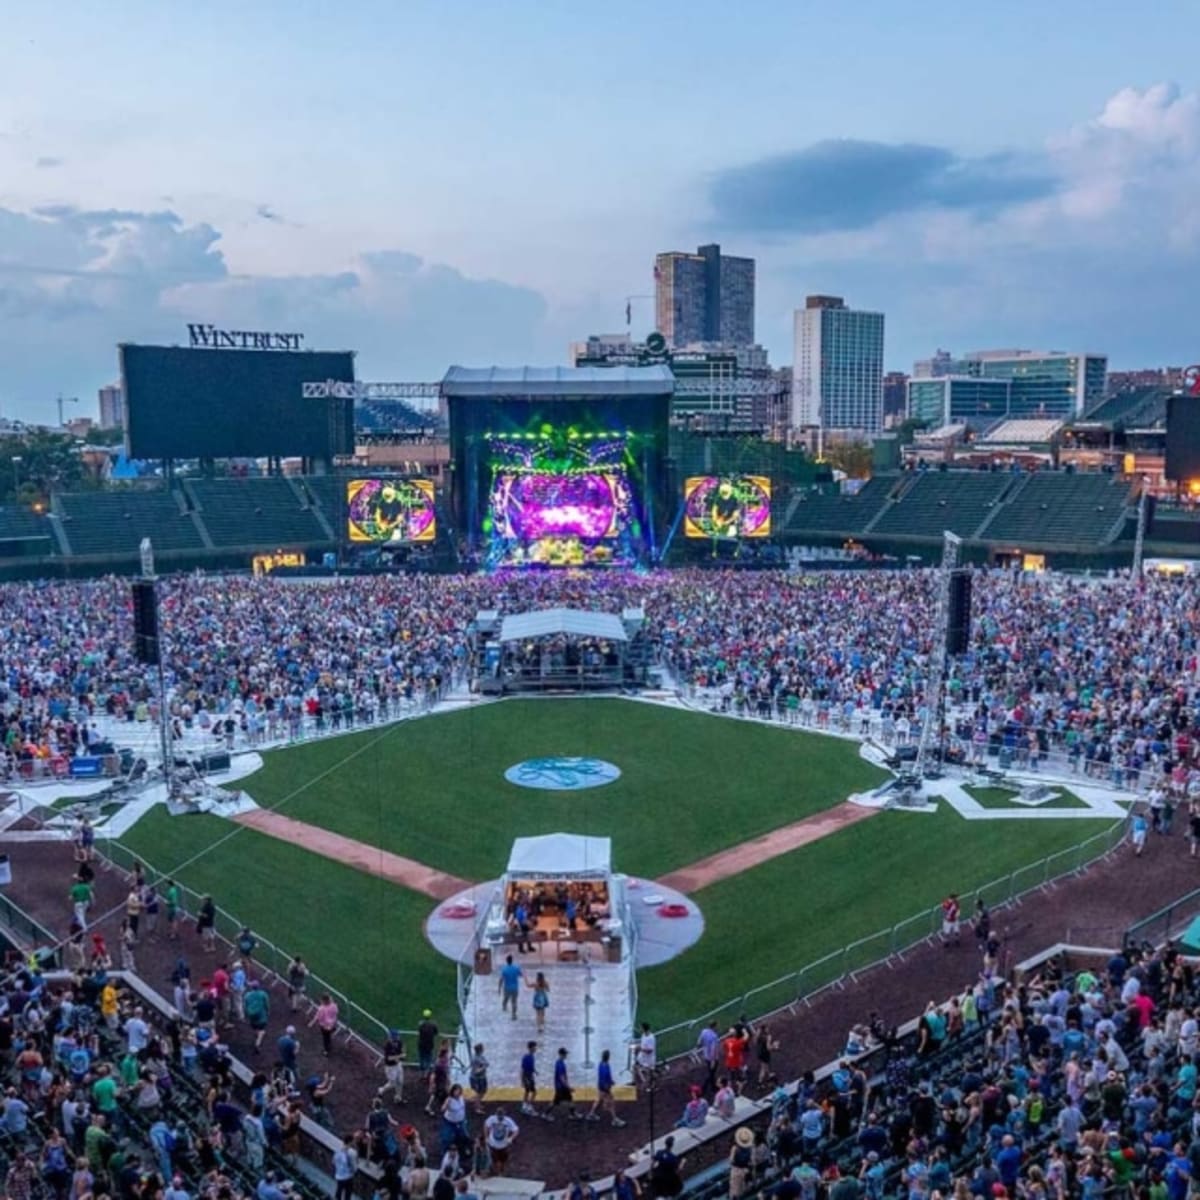 Wrigley Field Schedules Concerts for Summer 2021 - On Tap Sports Net